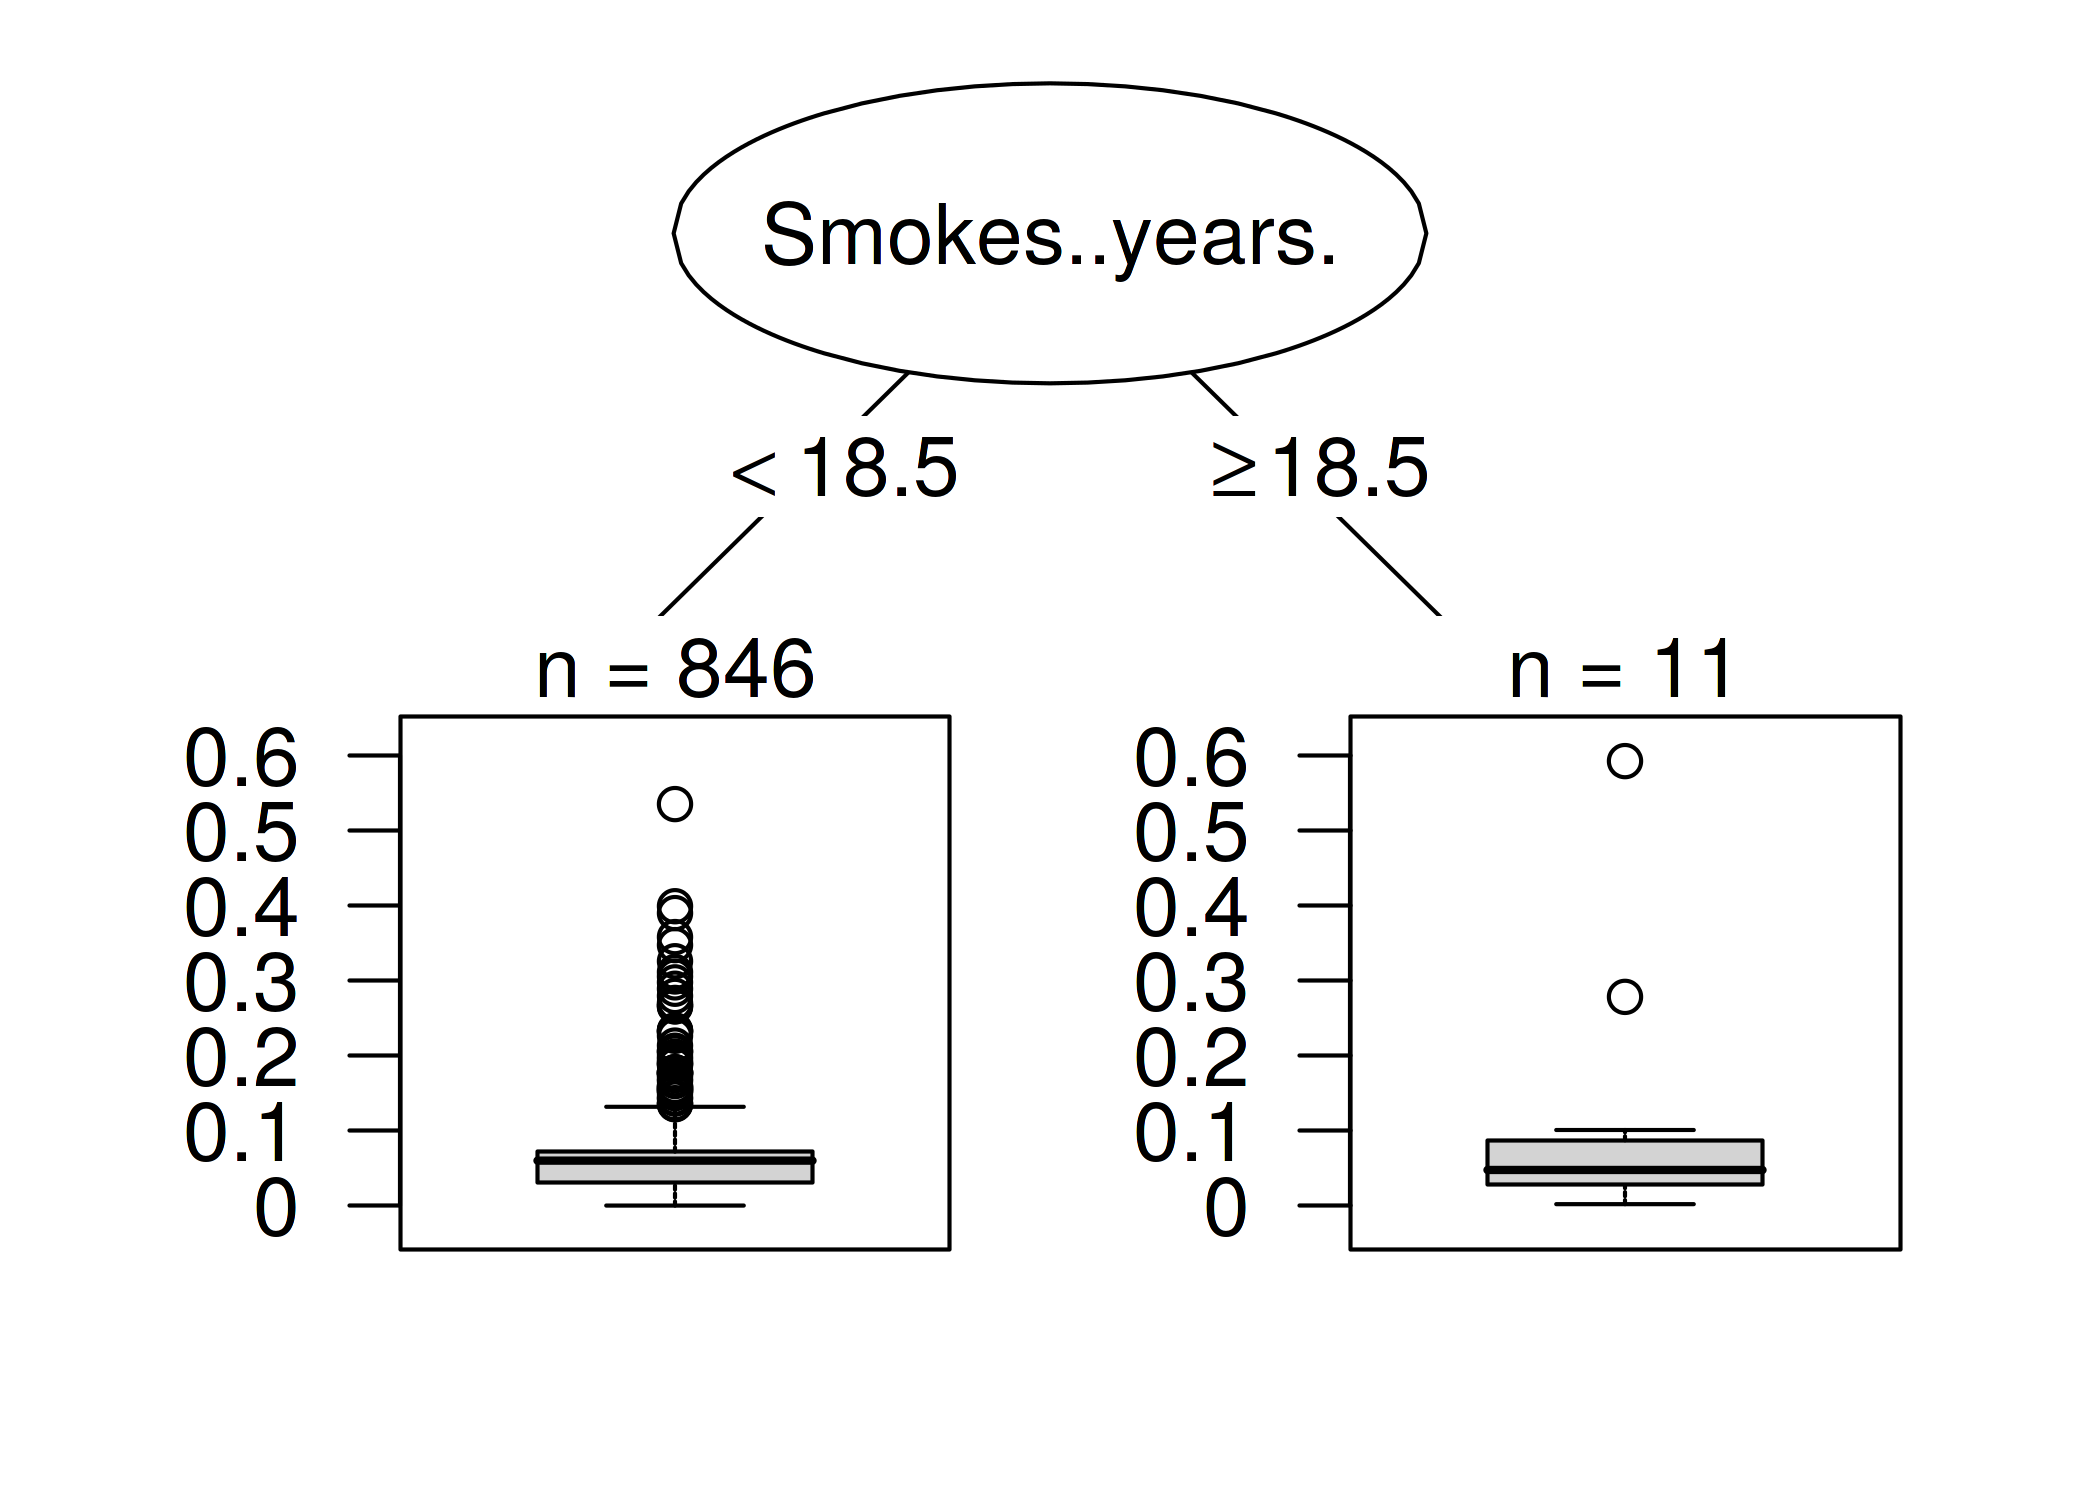 Decision tree that explains which instances were most influential for predicting the 7-th instance. Data from women who smoked for 18.5 years or longer had a large influence on the prediction of the 7-th instance, with an average change in absolute prediction by 11.7 percentage points of cancer probability.